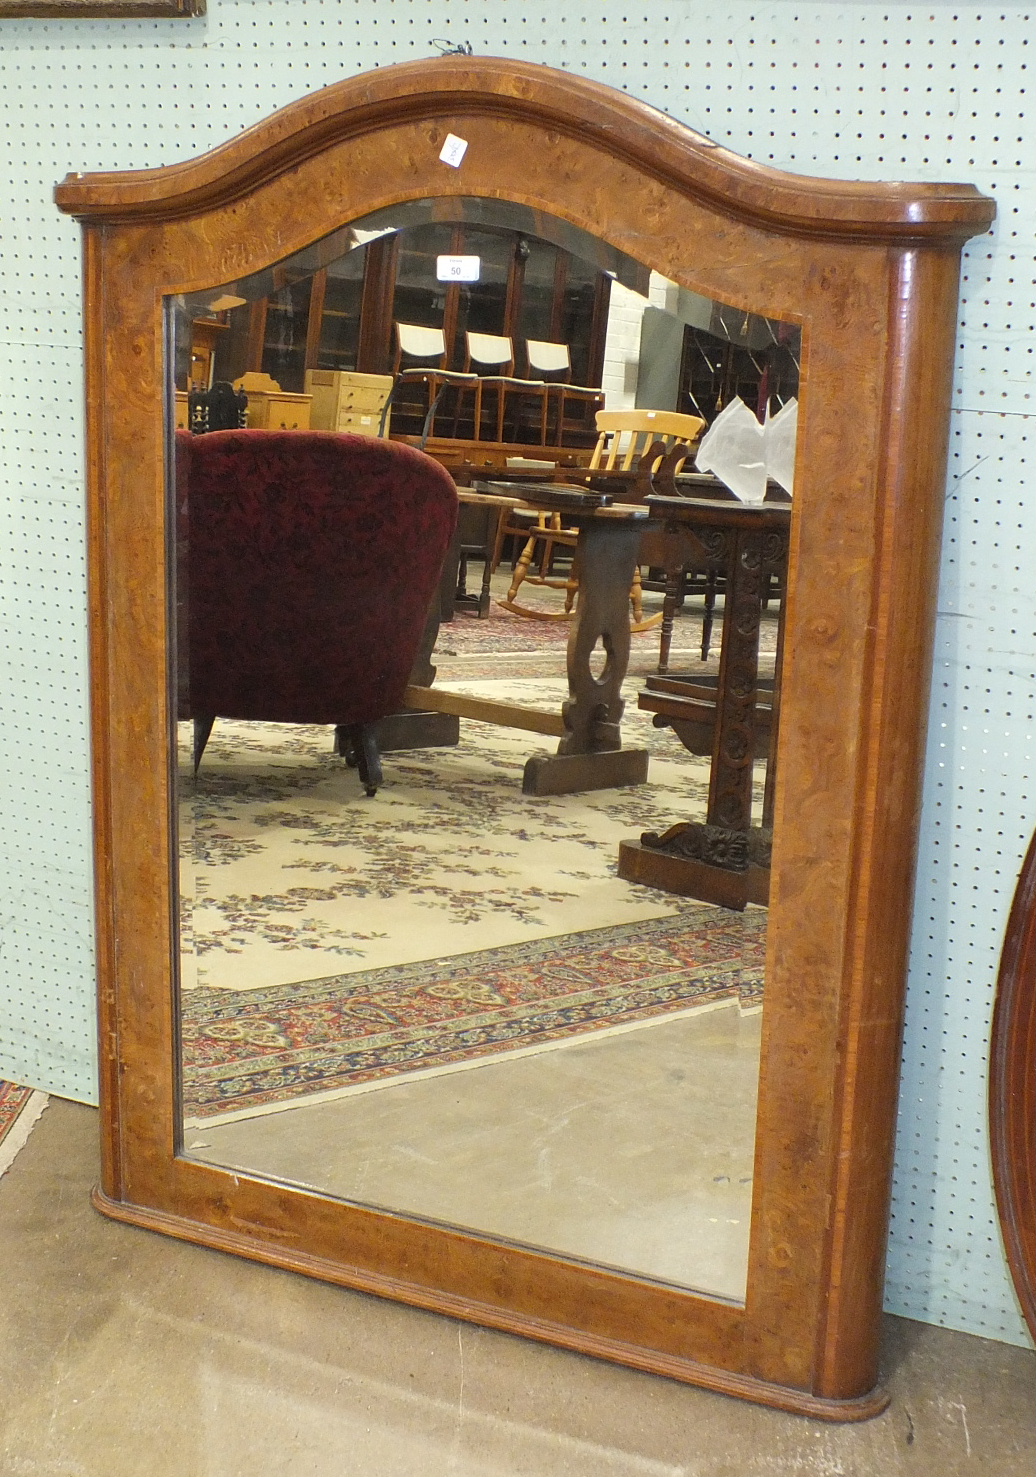 A 19th century French burr walnut cross-banded pier mirror, the arched corniced frame enclosing a